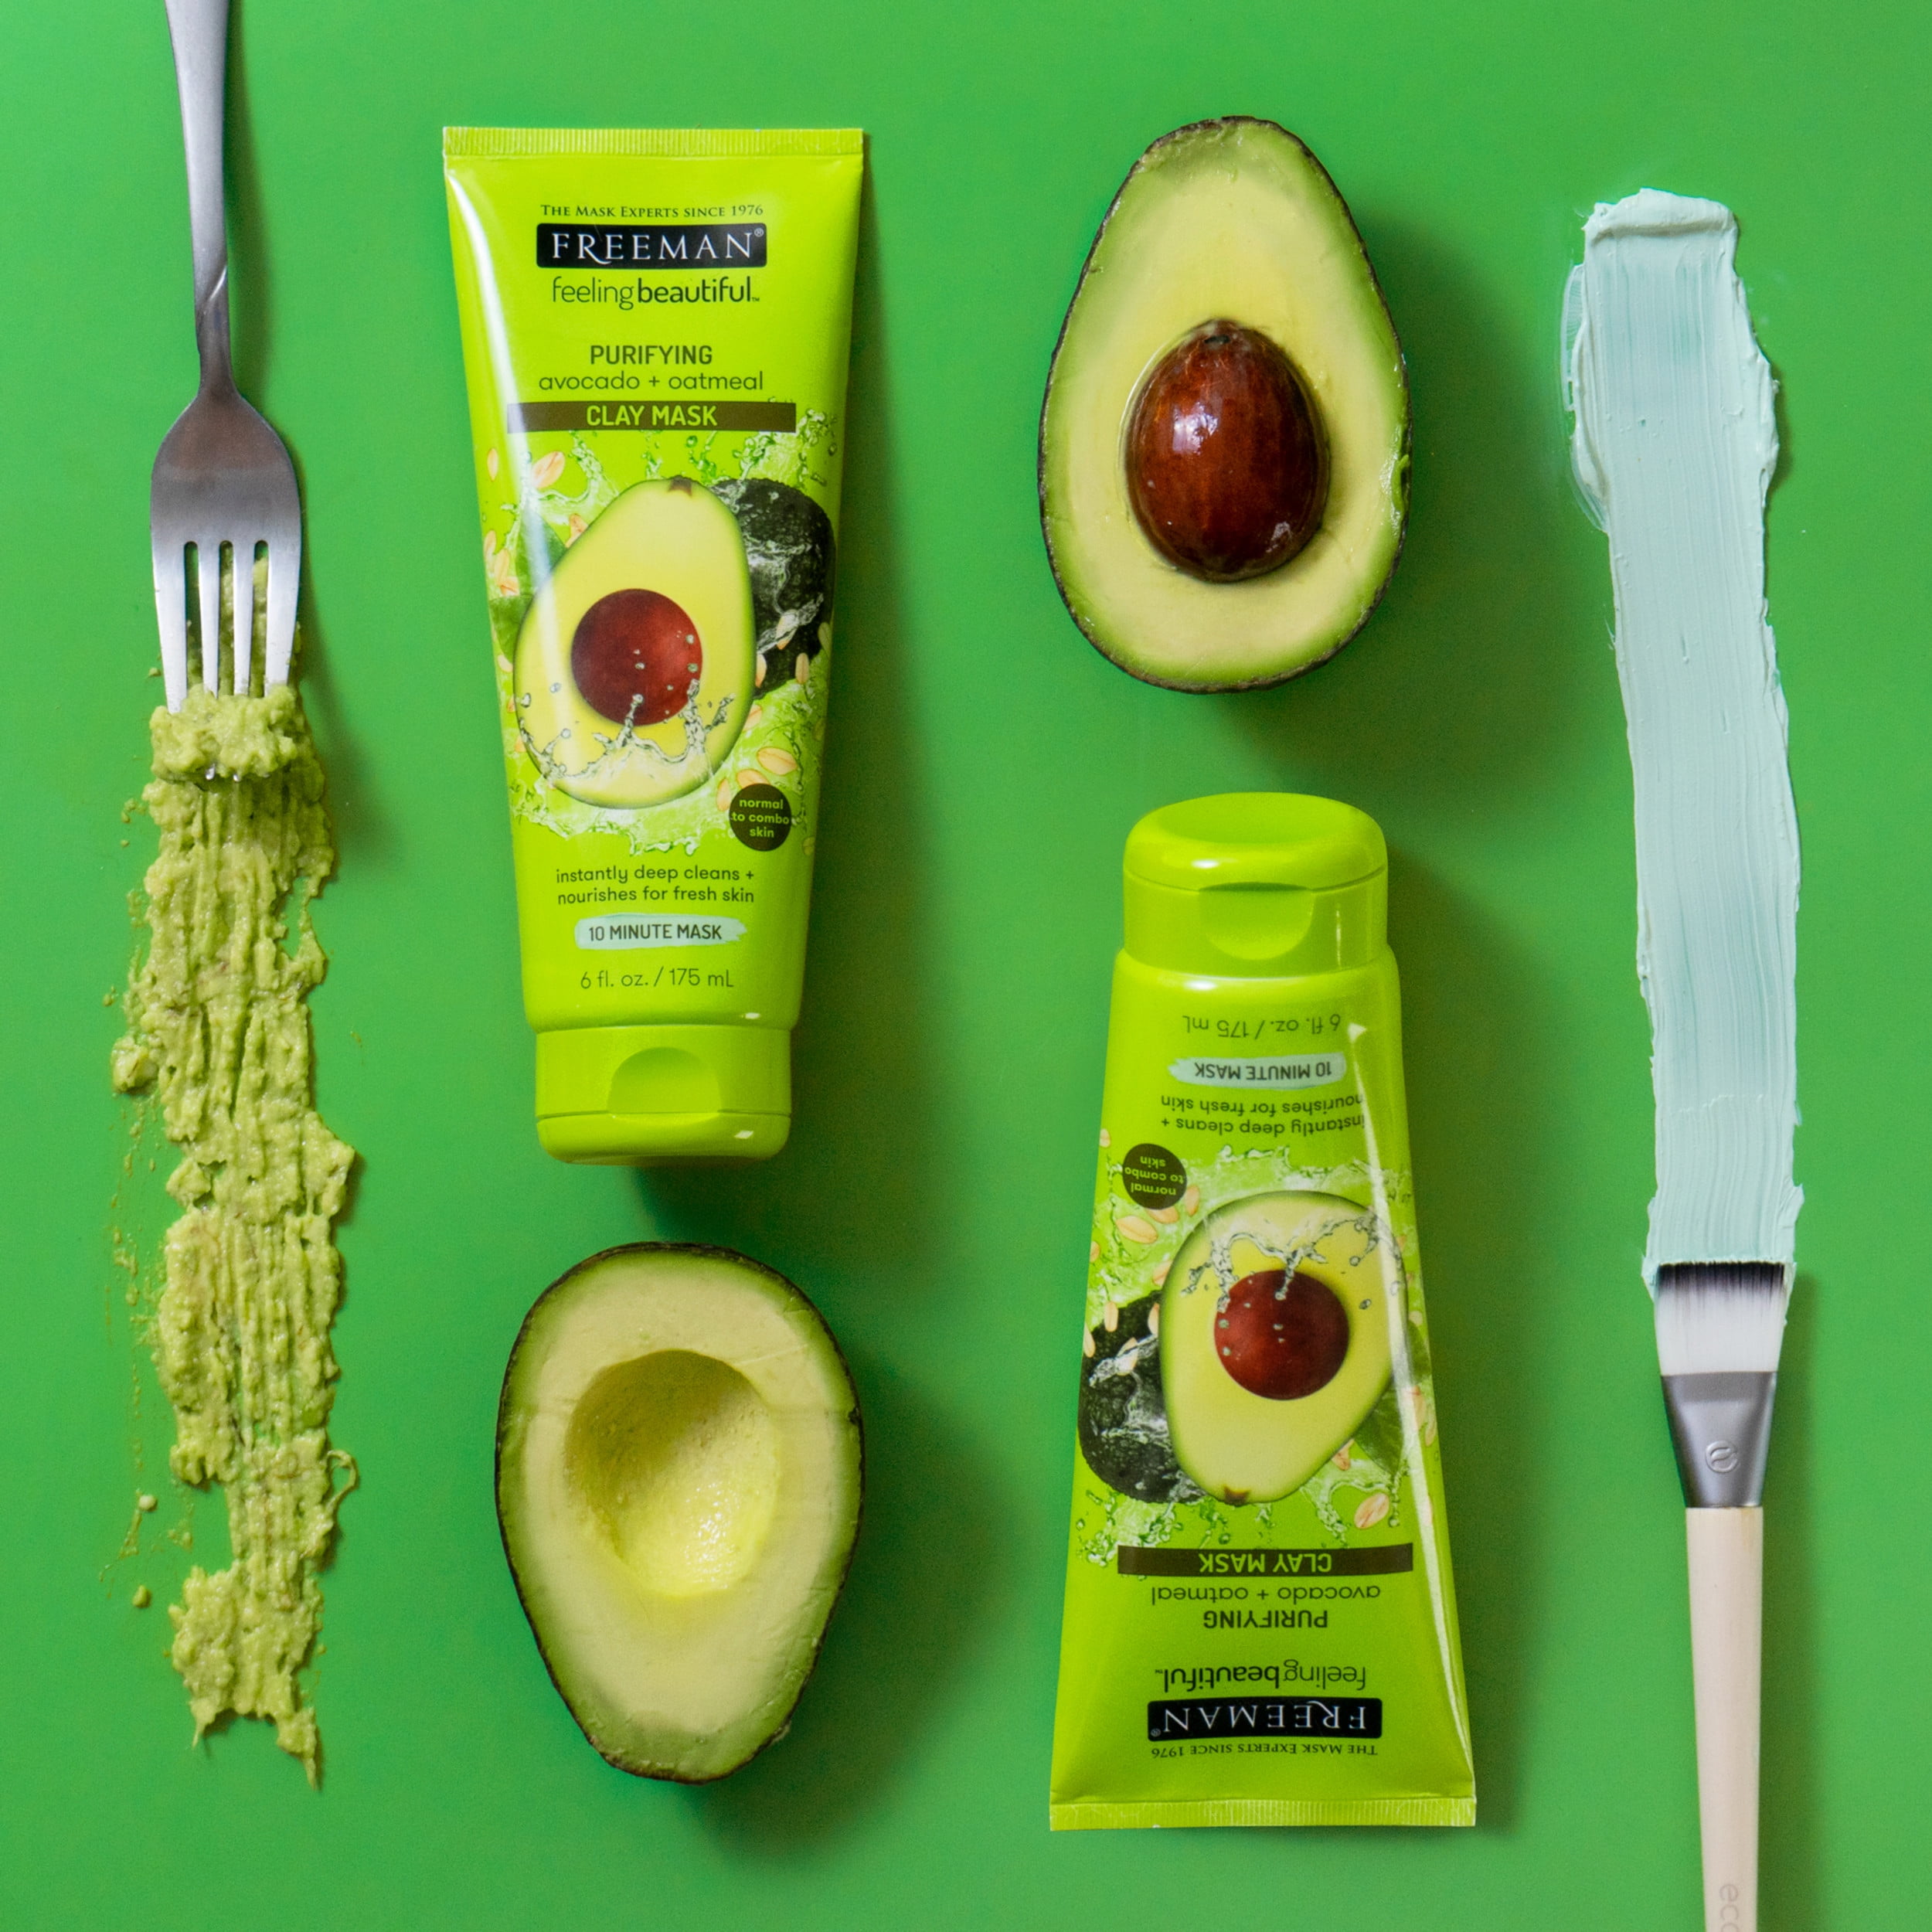 Won Relativiteitstheorie Hamburger Freeman Purifying Avocado & Oatmeal Clay Facial Mask, Face Mask Instantly  Deep Cleans, Creates Fresh Skin With Vitamin E, Perfect For Normal To  Combination Skin, 6 fl.oz./175 mL Tube - Walmart.com